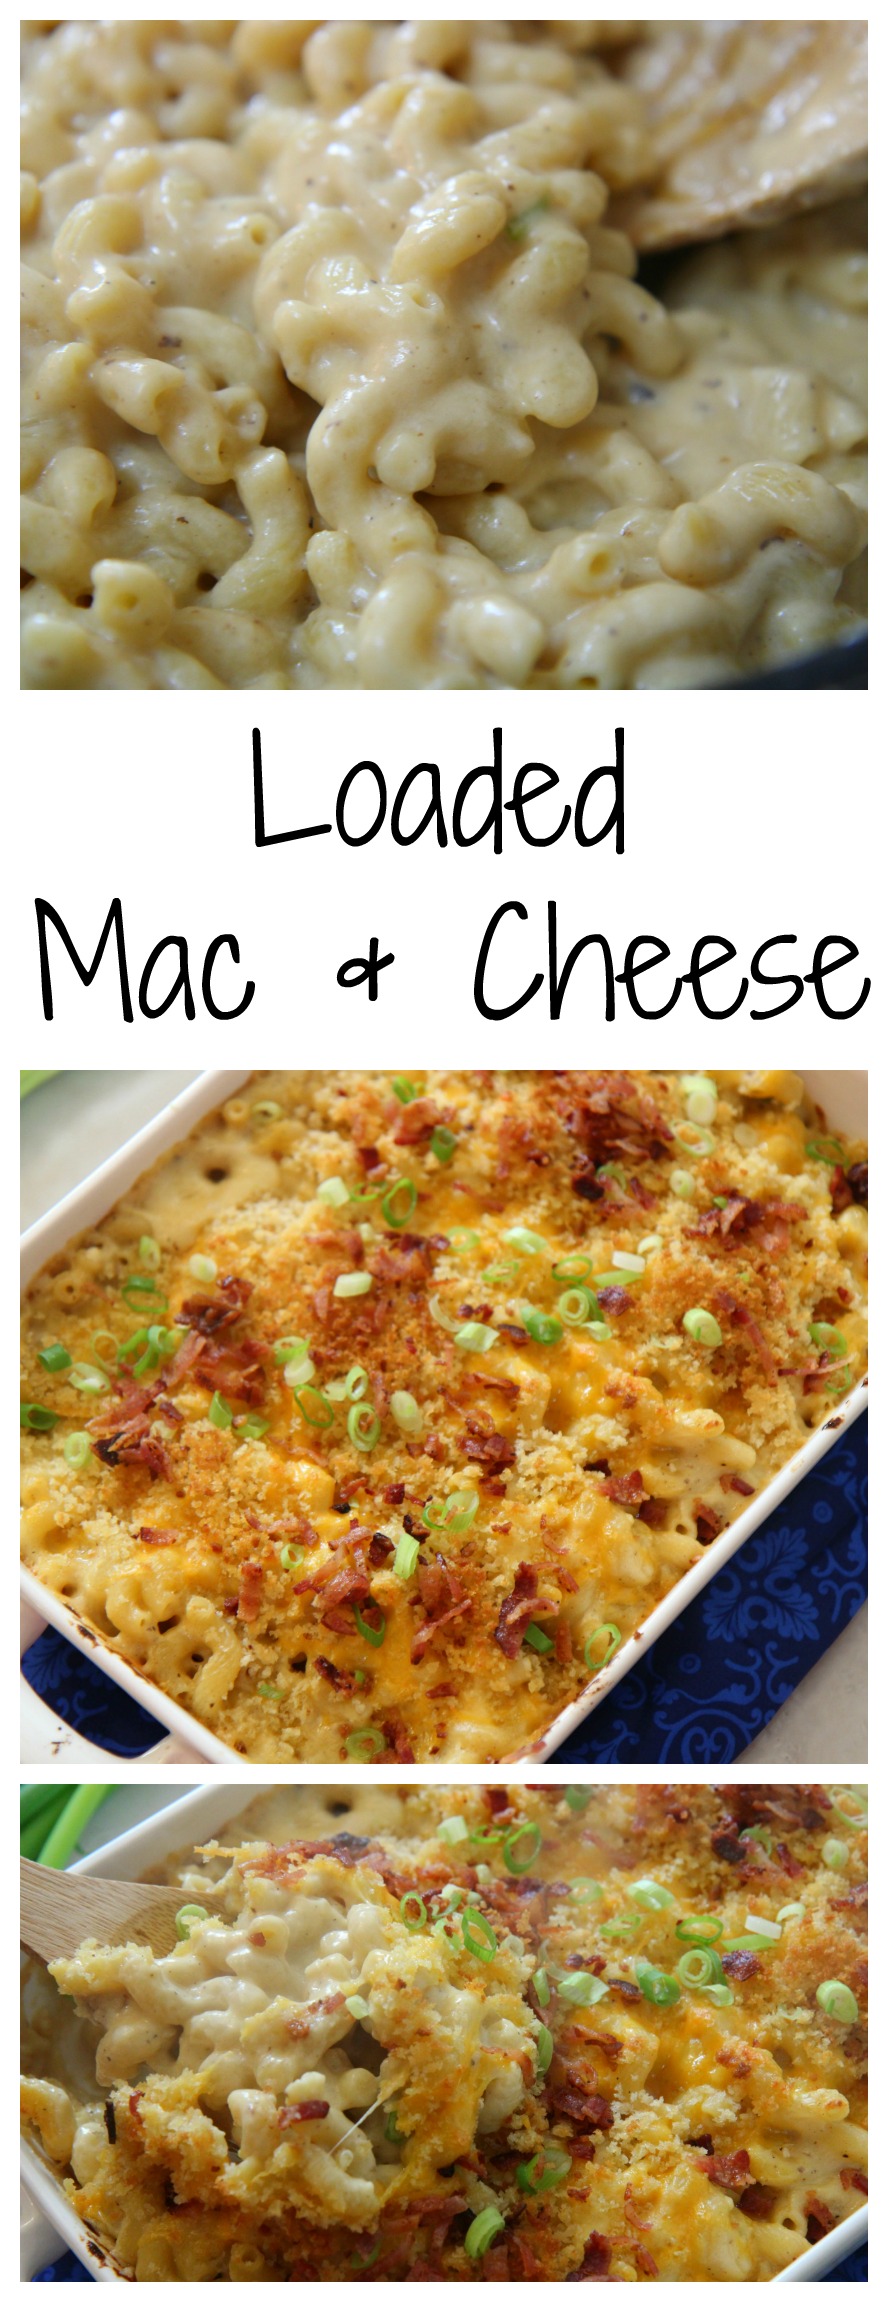 Learn how to make this loaded Mac & Cheese at CookedbyJulie.com